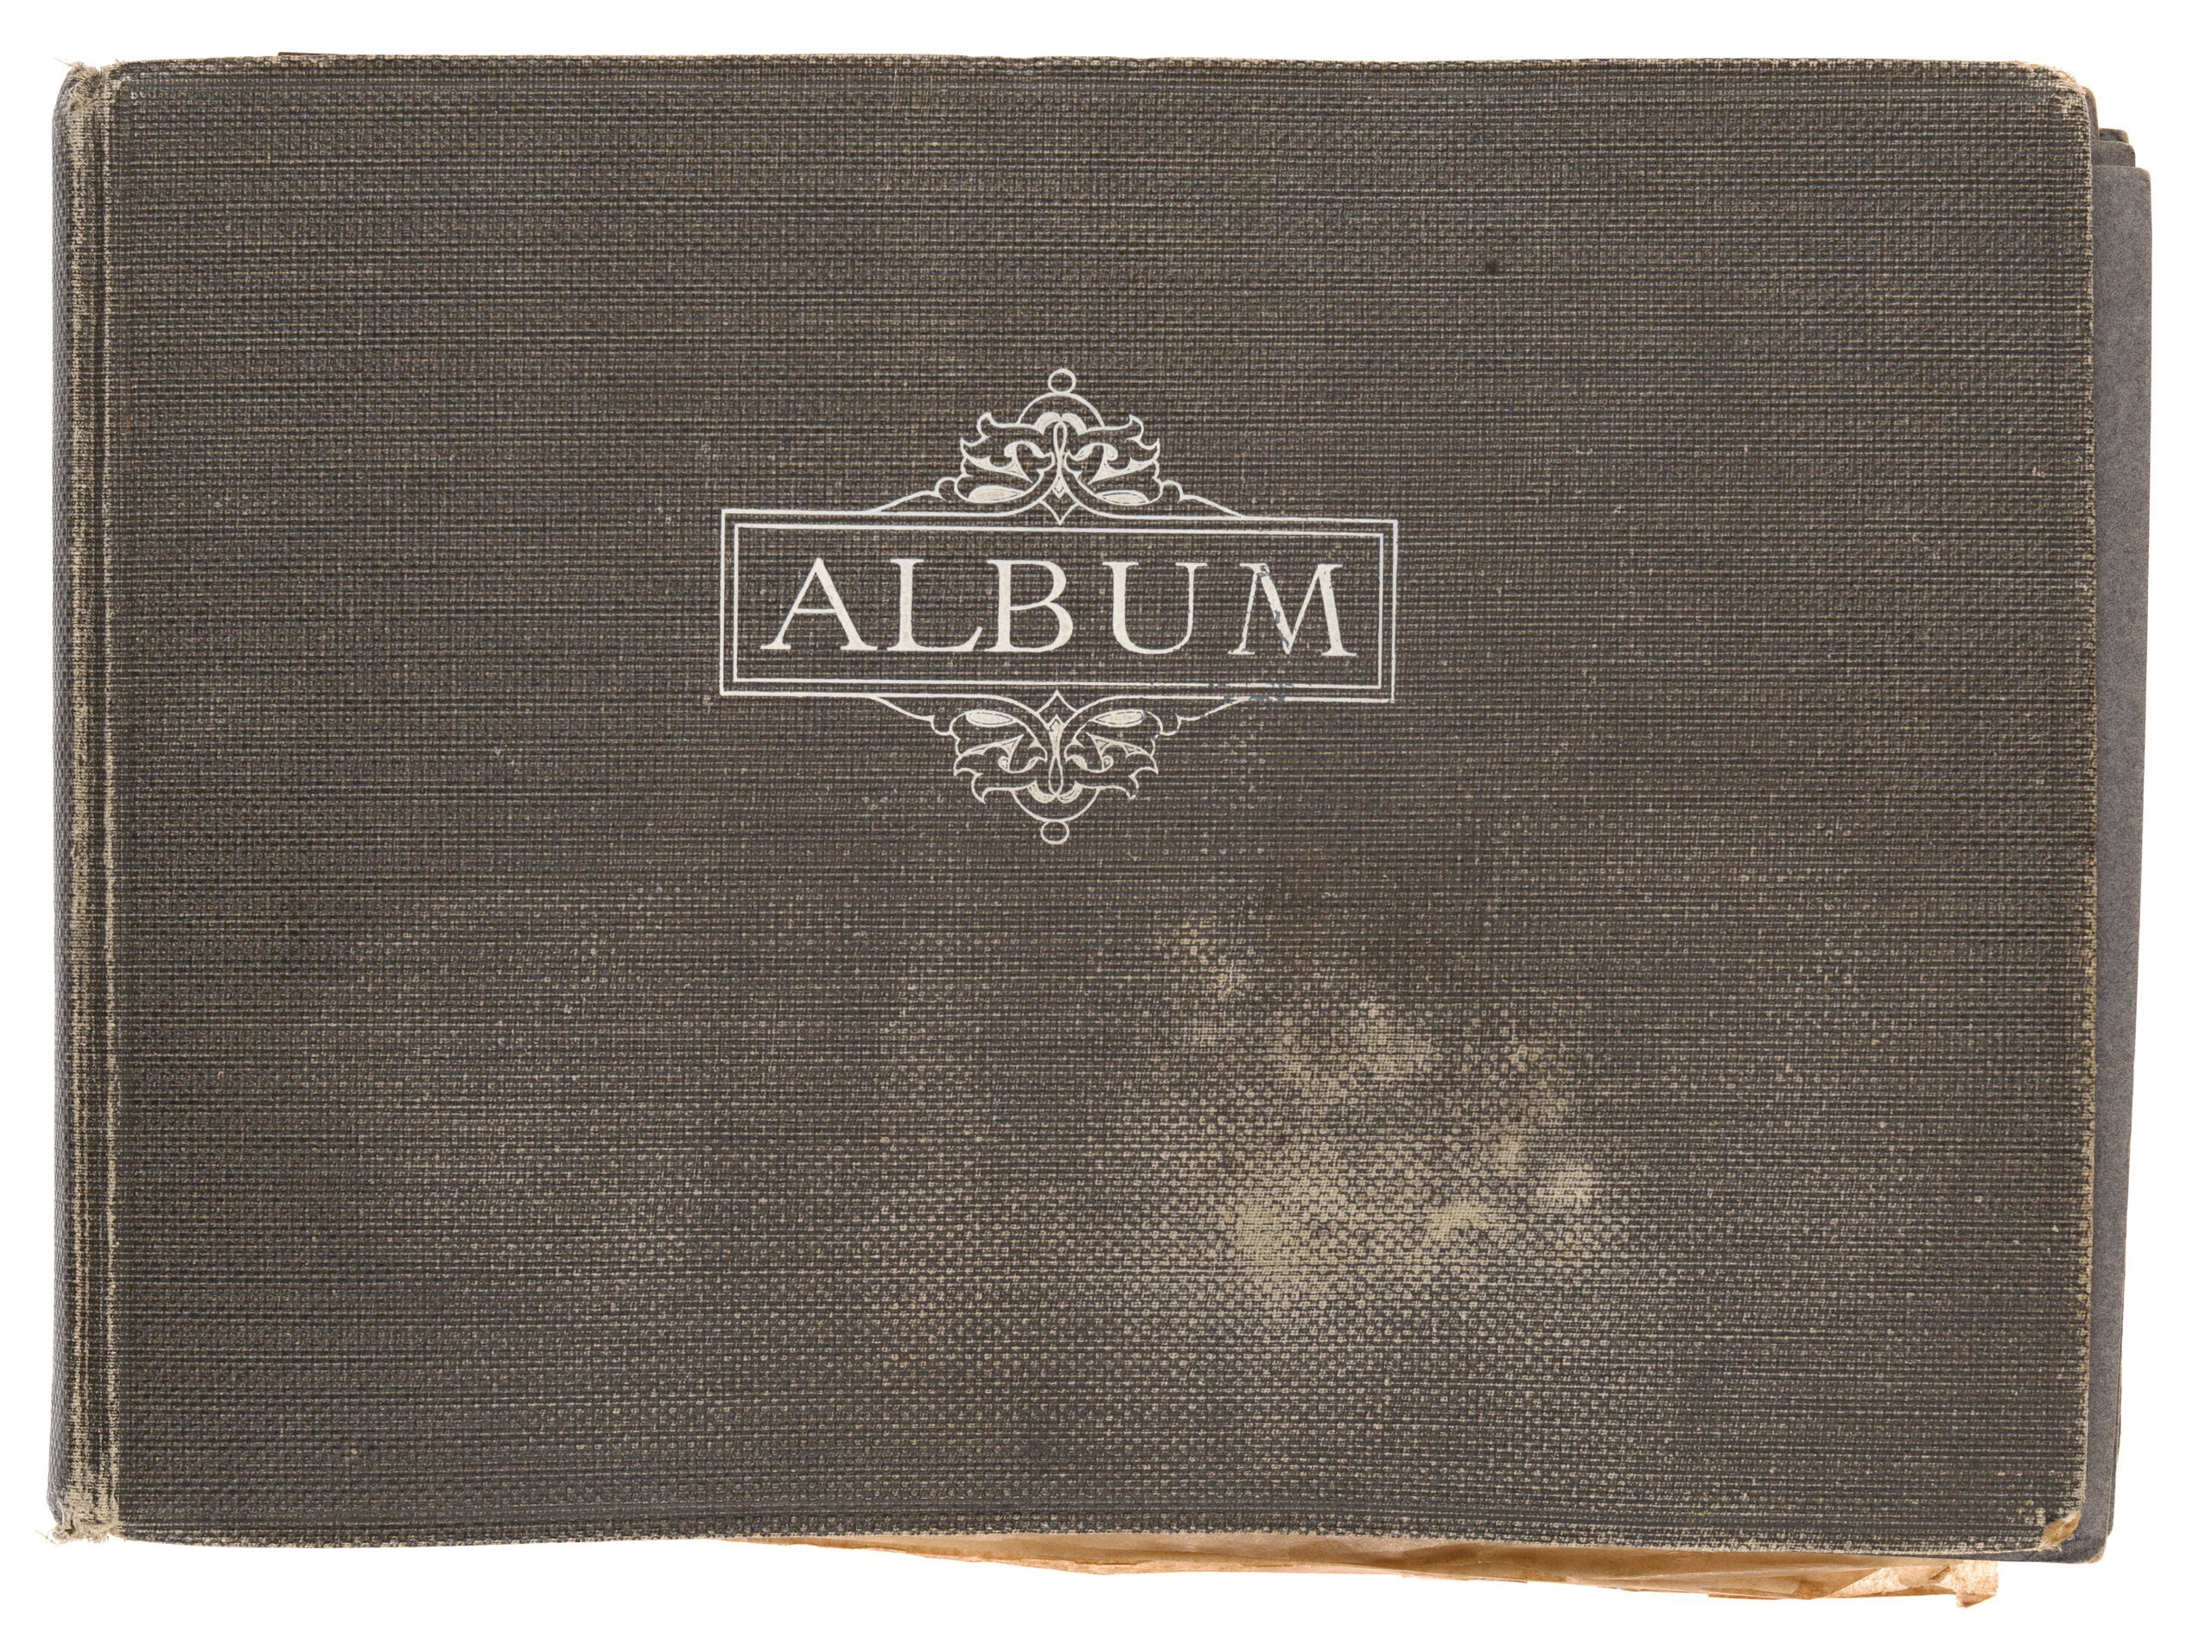 Photograph album containing Rousel Studios advertising signwriting and graphic designs